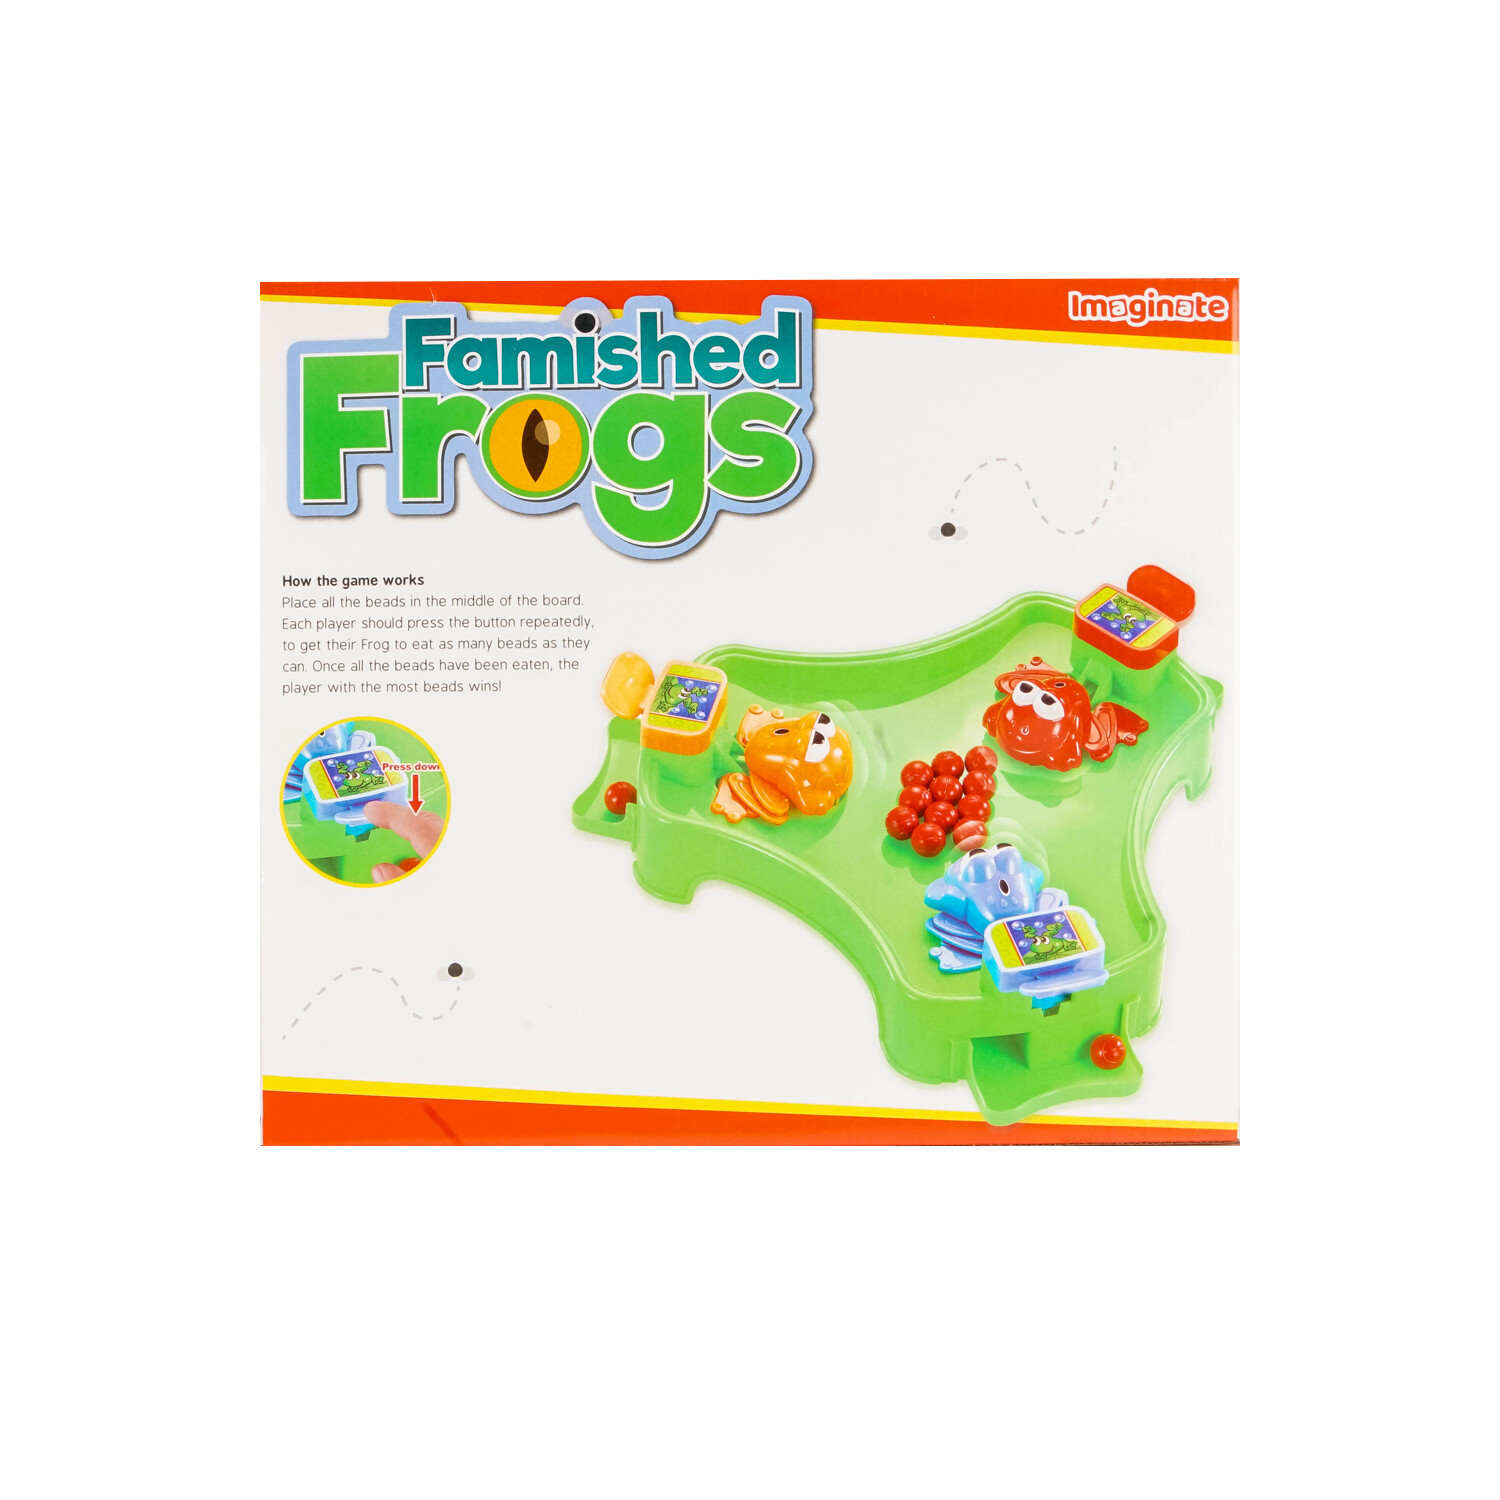 Imaginate Famished Frogs Game Image 2